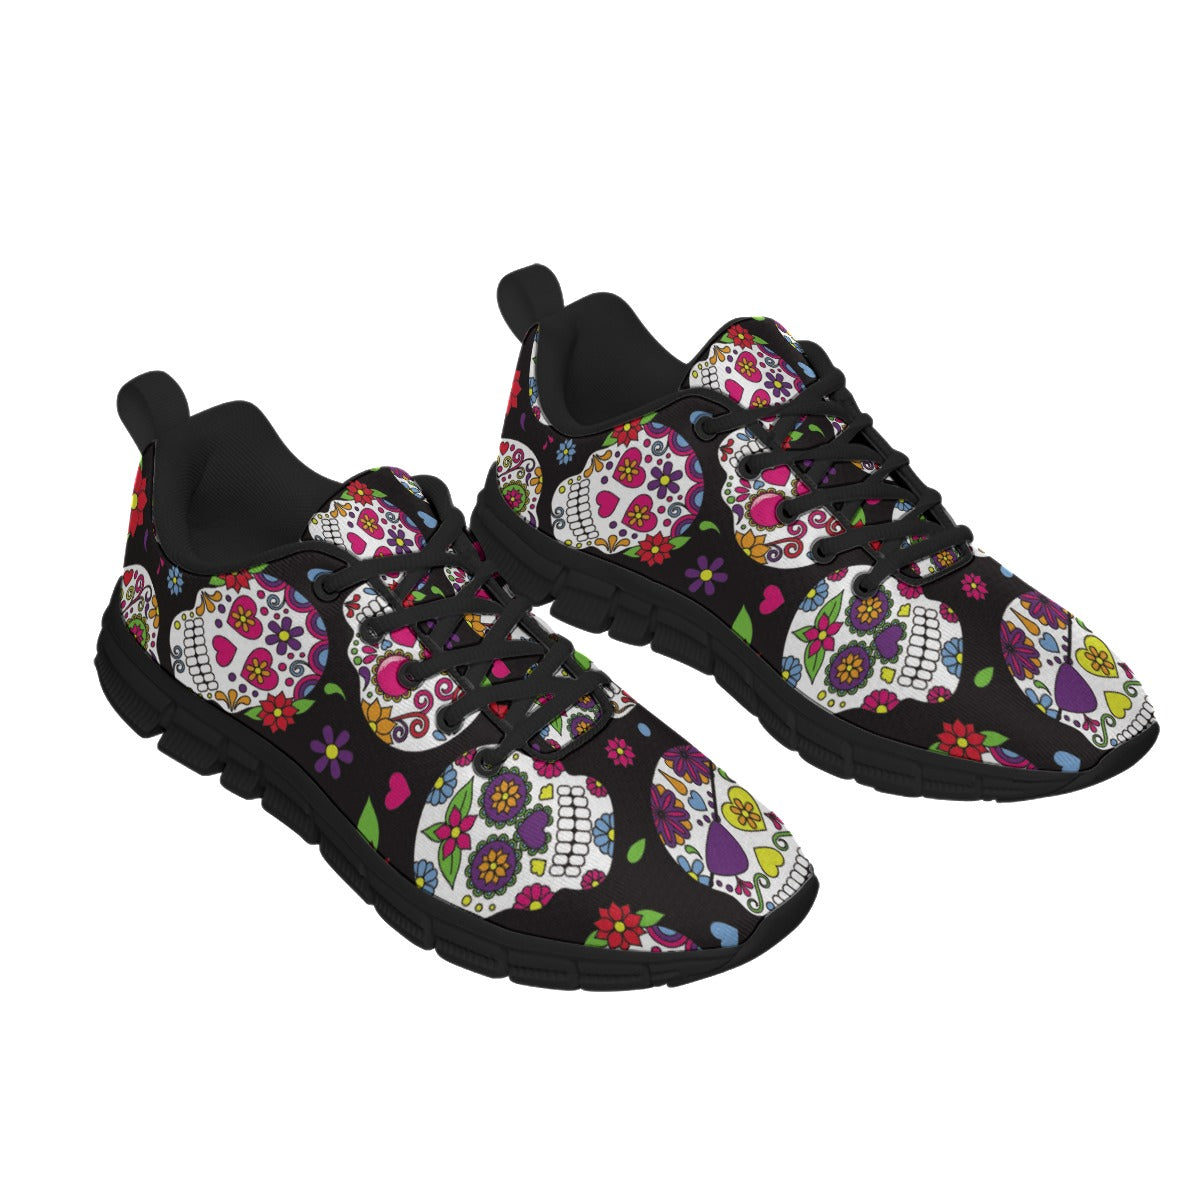 Sugar skull Day of the dead Men's Sports Shoes